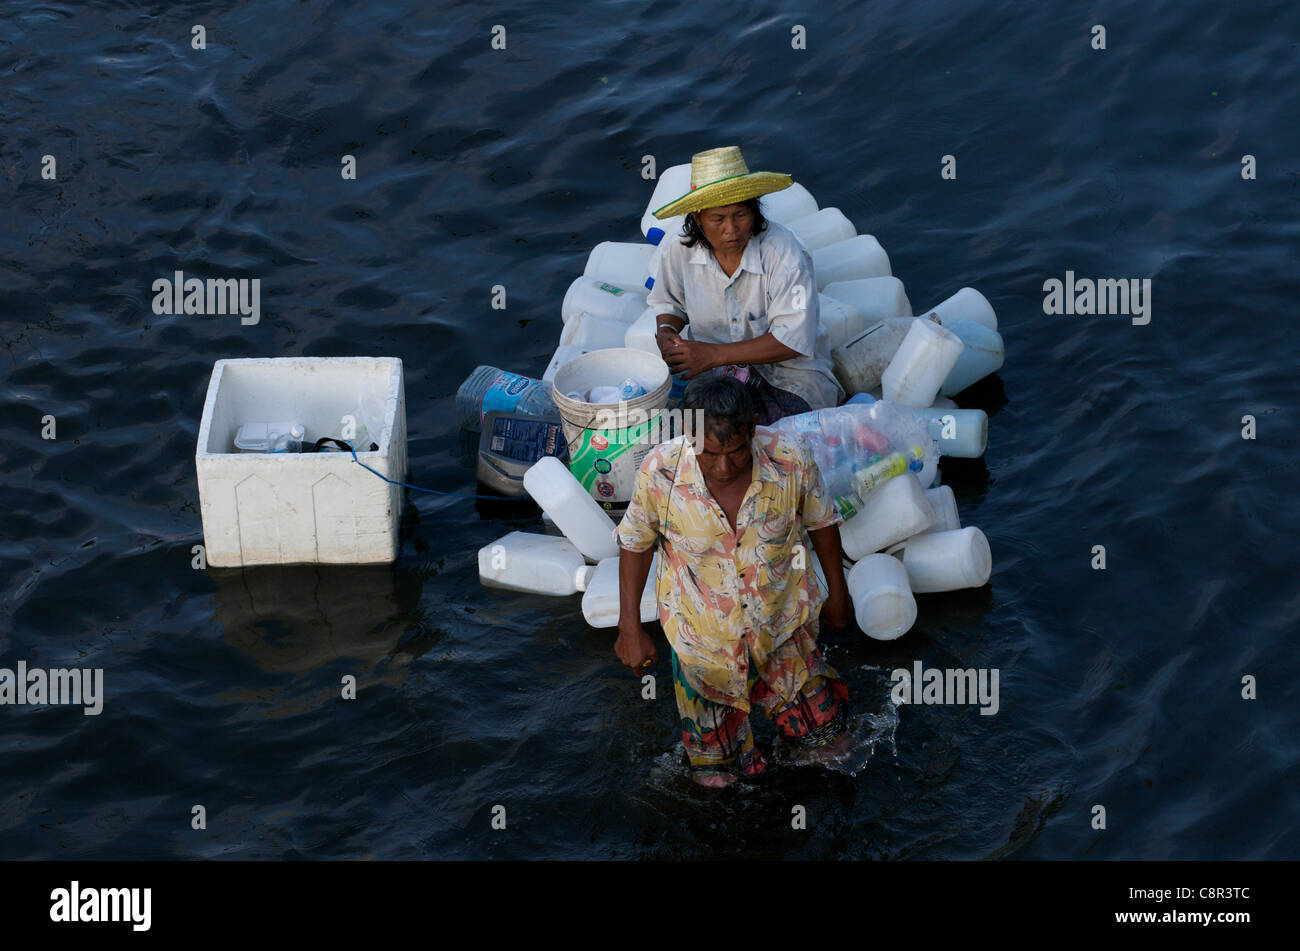 Thai refugees flee flooding on makeshift raft, Phahon Yothin Road, Bangkok, Thailand on Monday, October 31st, 2011. Thailand is experiencing its worst flooding in more than 50 years. Credit Line: Kraig Lieb / Alamy Live News. Stock Photo